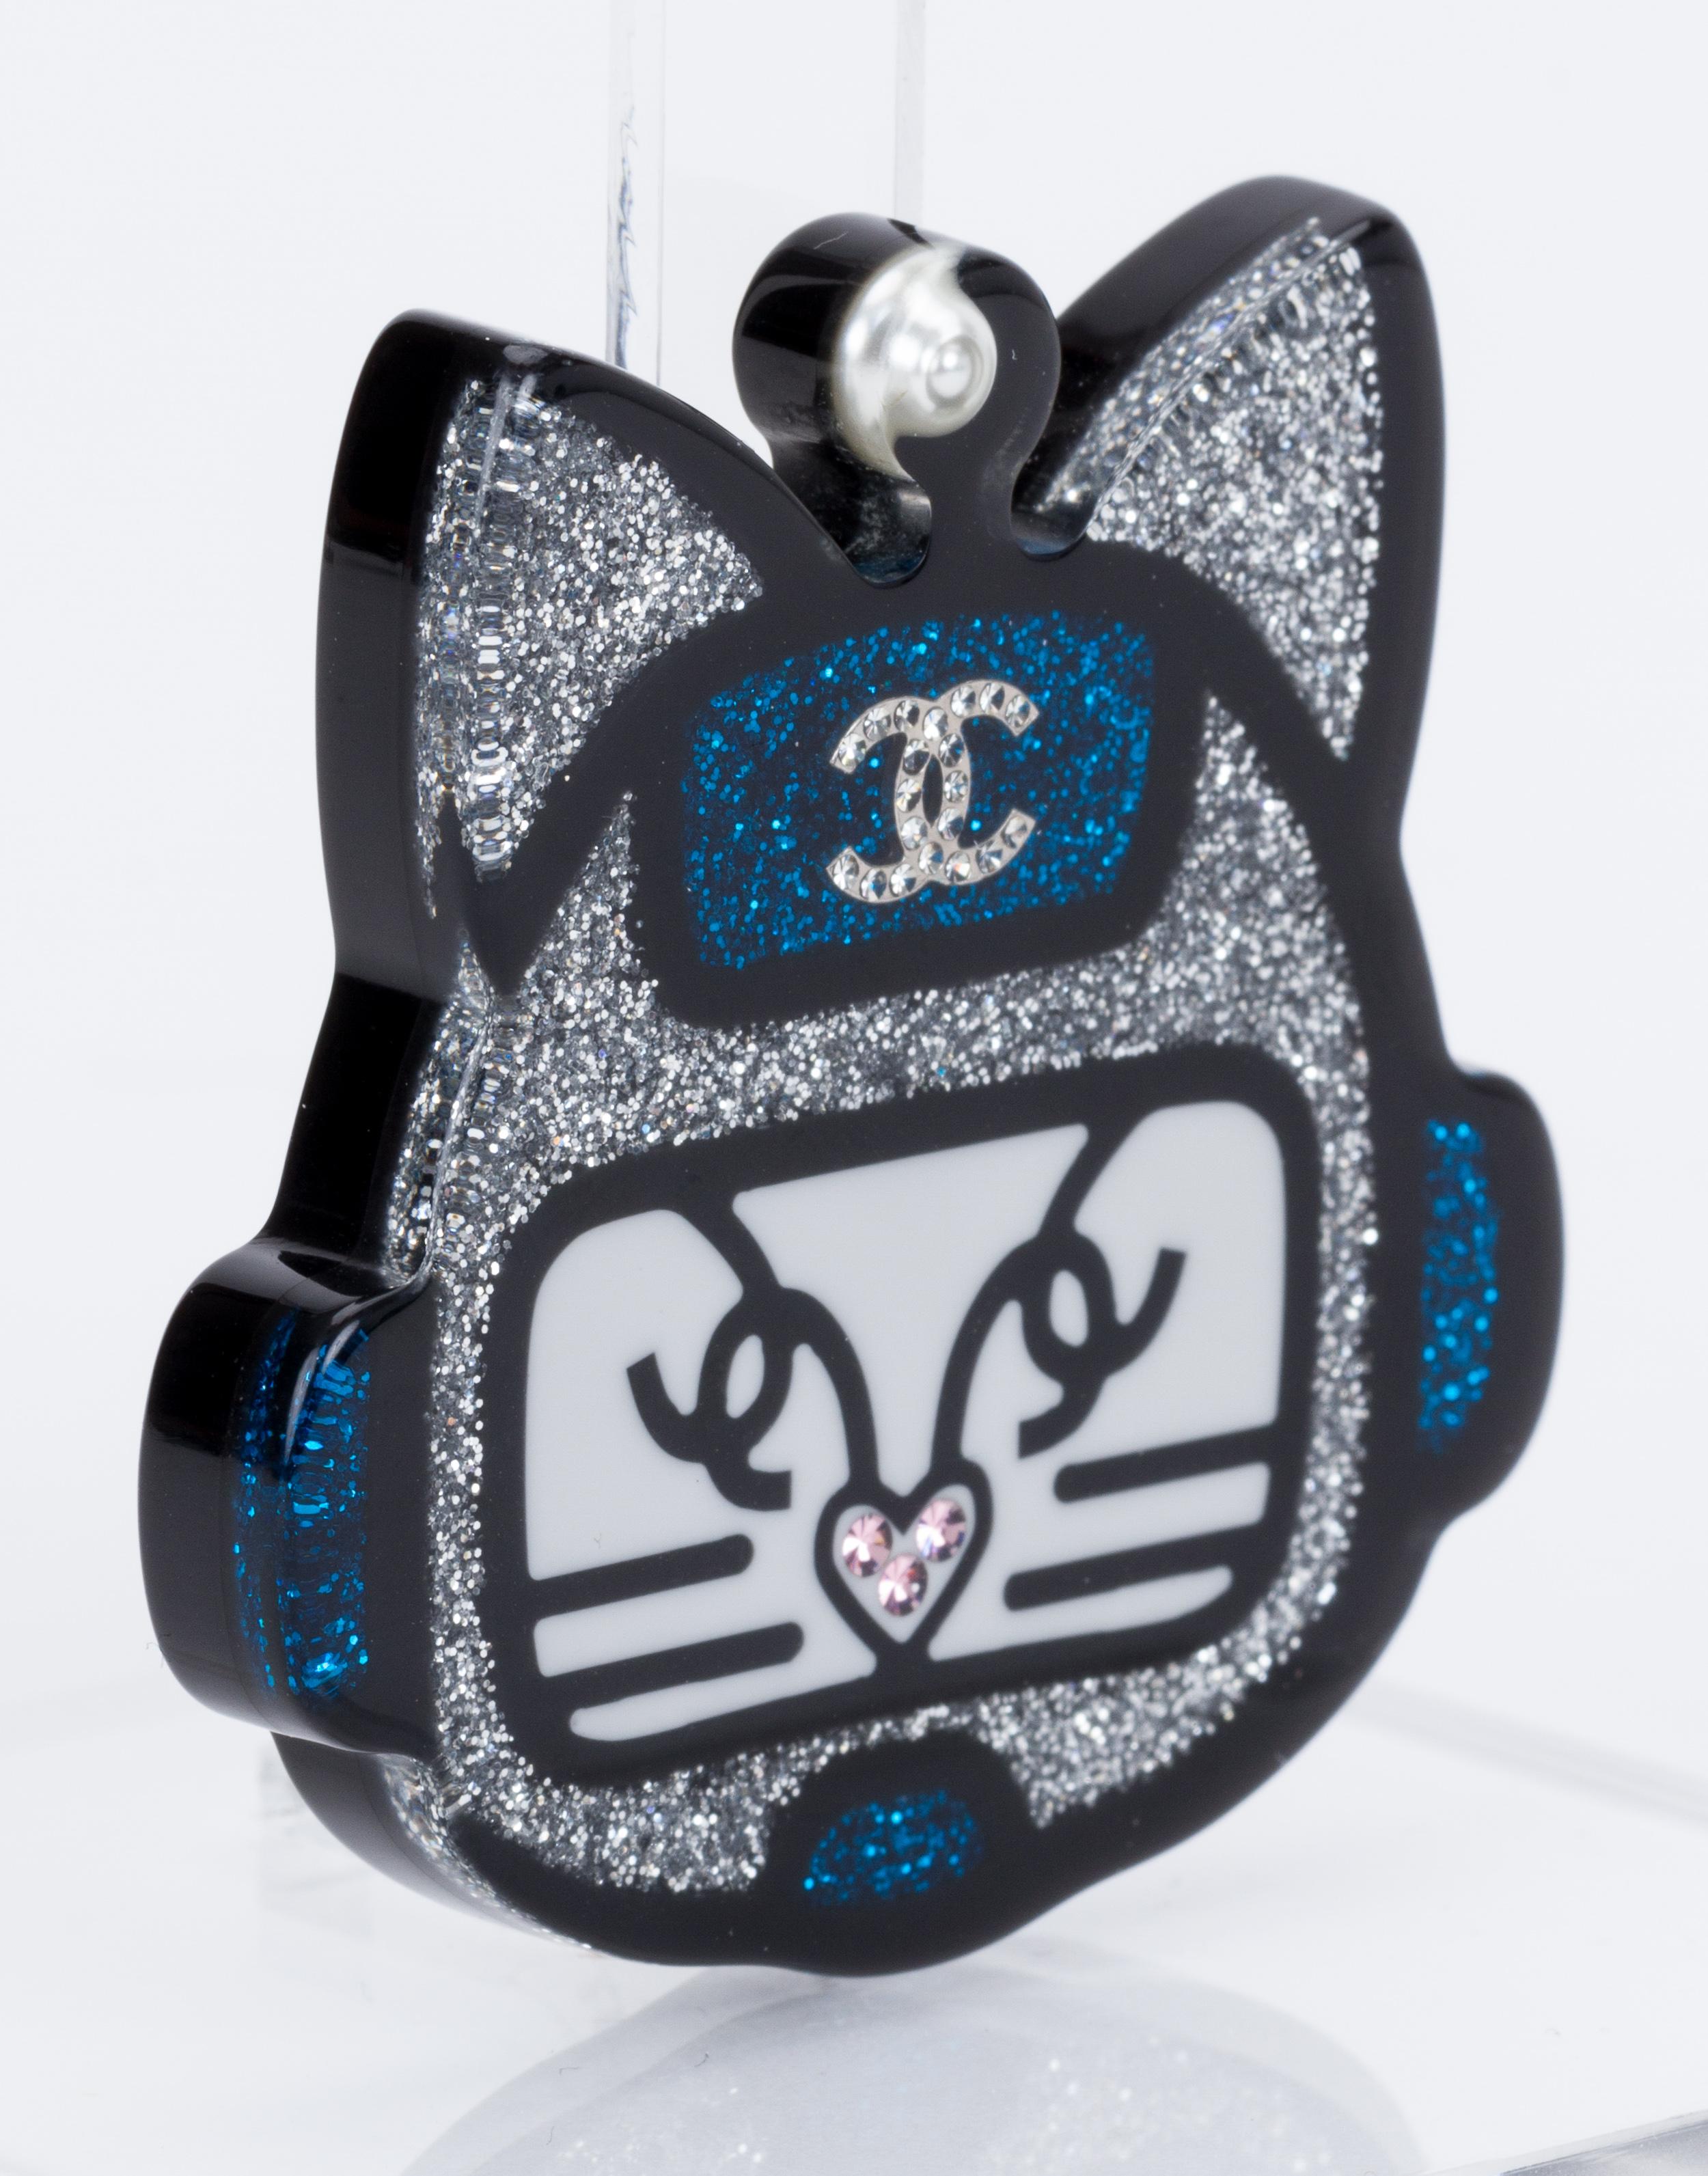 Chanel new silver and blue lucite cat face pin. Collection spring 2017. Comes with original box and ribbon.